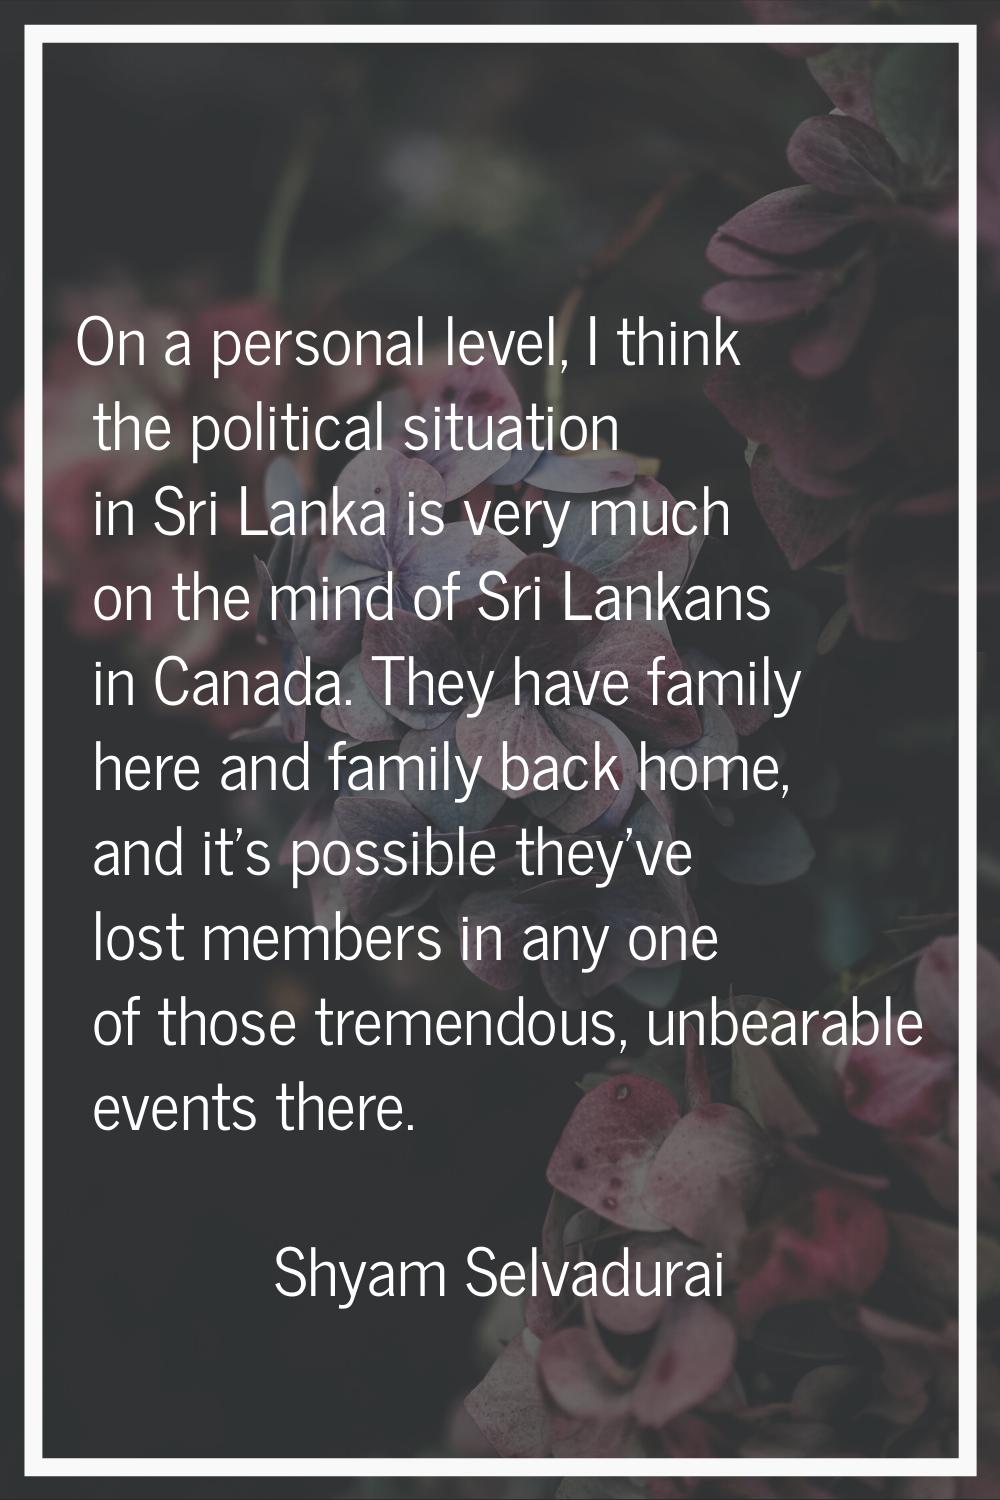 On a personal level, I think the political situation in Sri Lanka is very much on the mind of Sri L